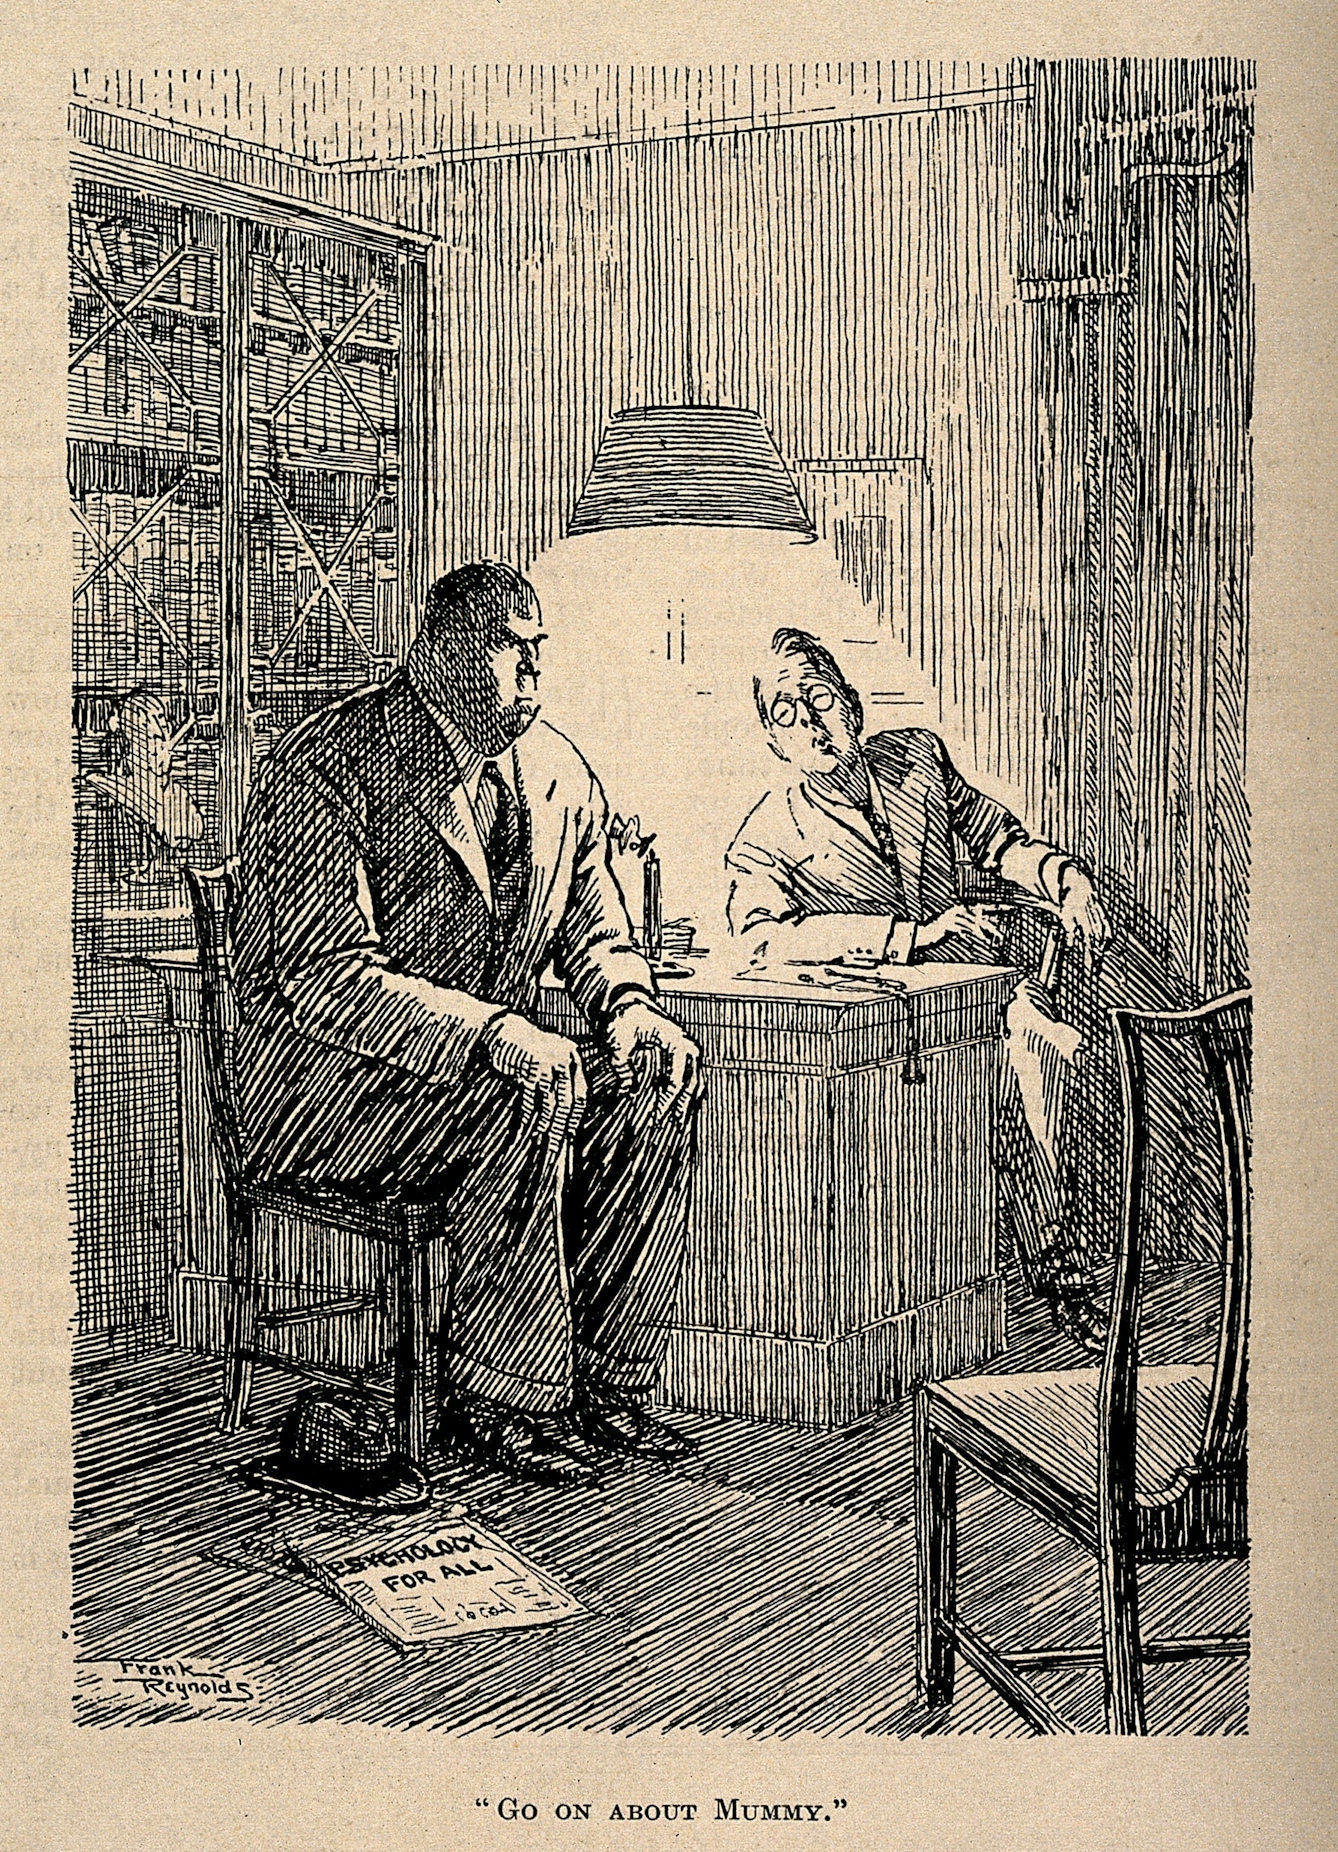 Reproduction of a line drawing showing a large man in a suit looking furious as another man wearing glasses and sitting behind a desk leans towards him and says “Go on about mummy”. On the floor is a newspaper that bears the headline “psychology for all”.